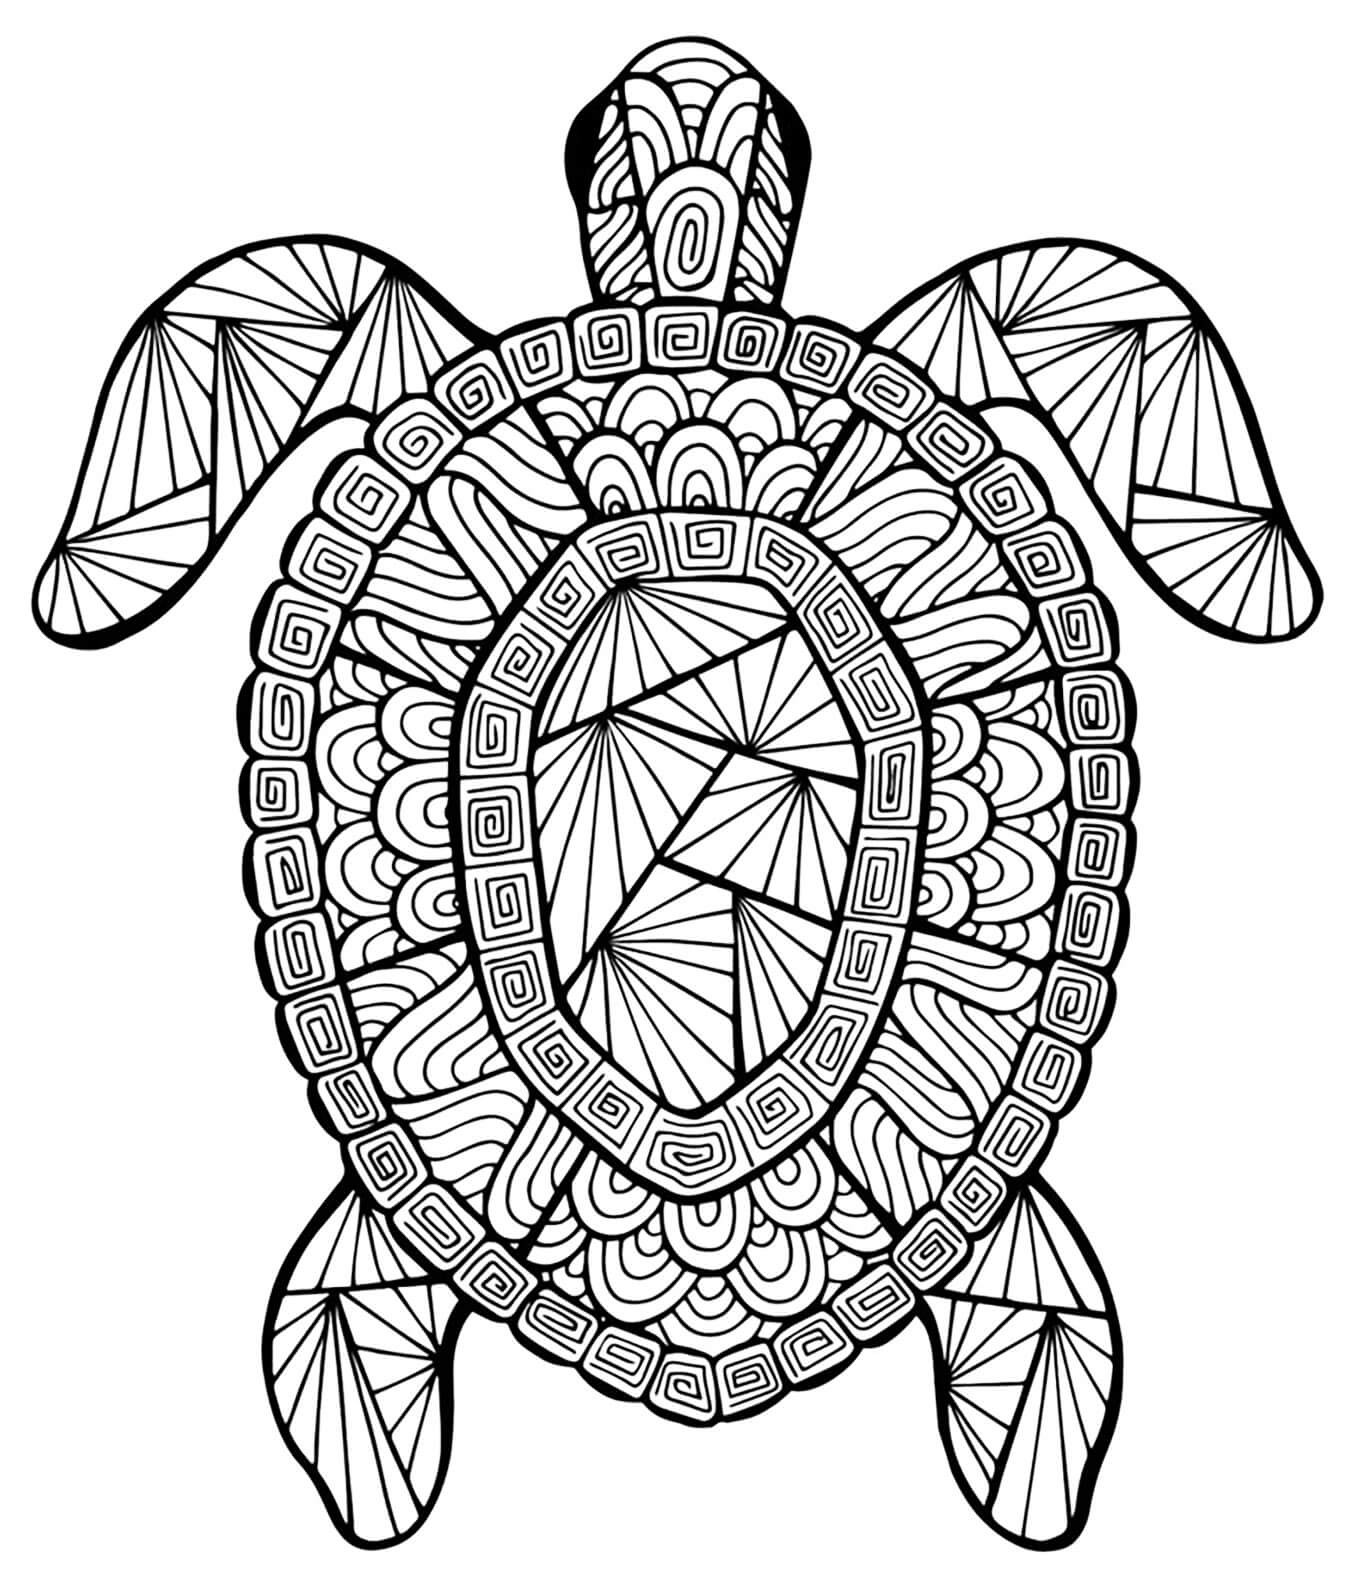 Coloring Pages For Adults Difficult Animals
 Coloring Pages For Adults Difficult Animals 44